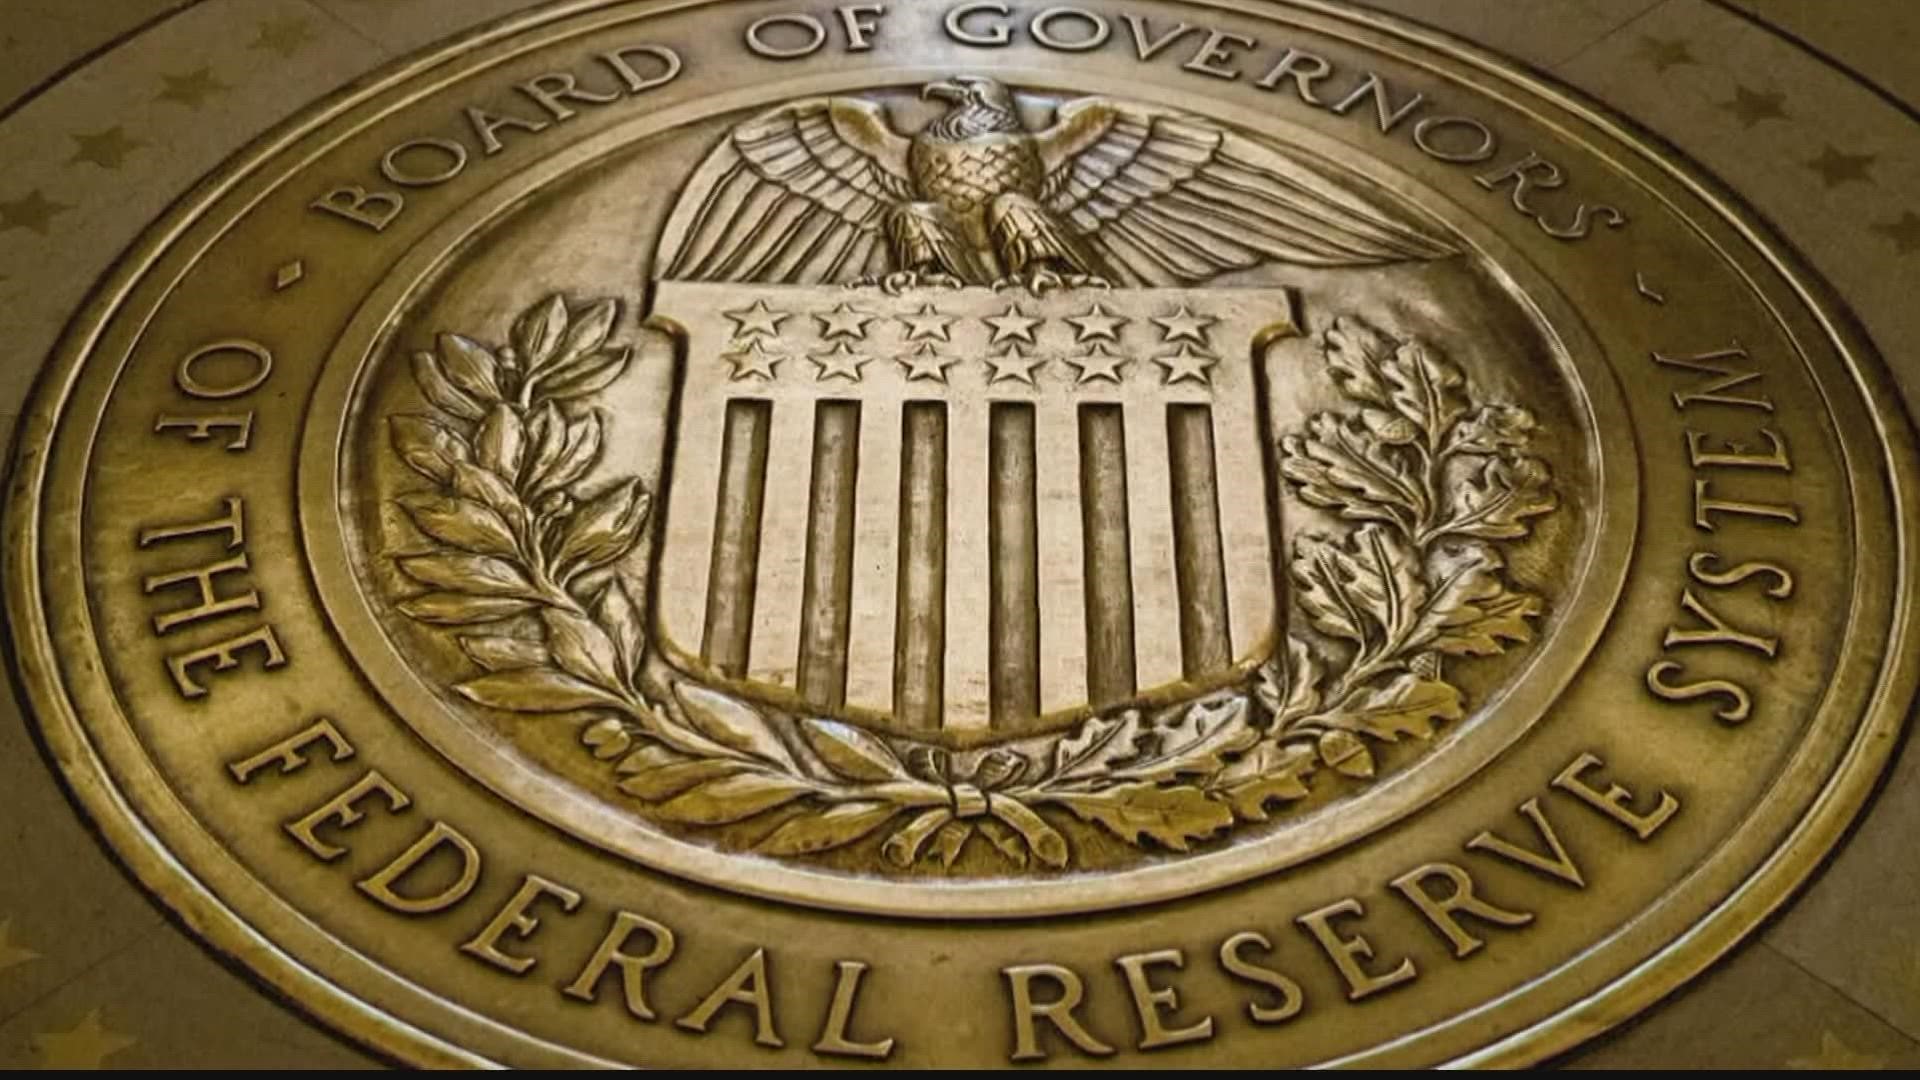 According to financial expert Ted Jenkin, the Federal Reserve is expected to announce a 0.25% rate increase.